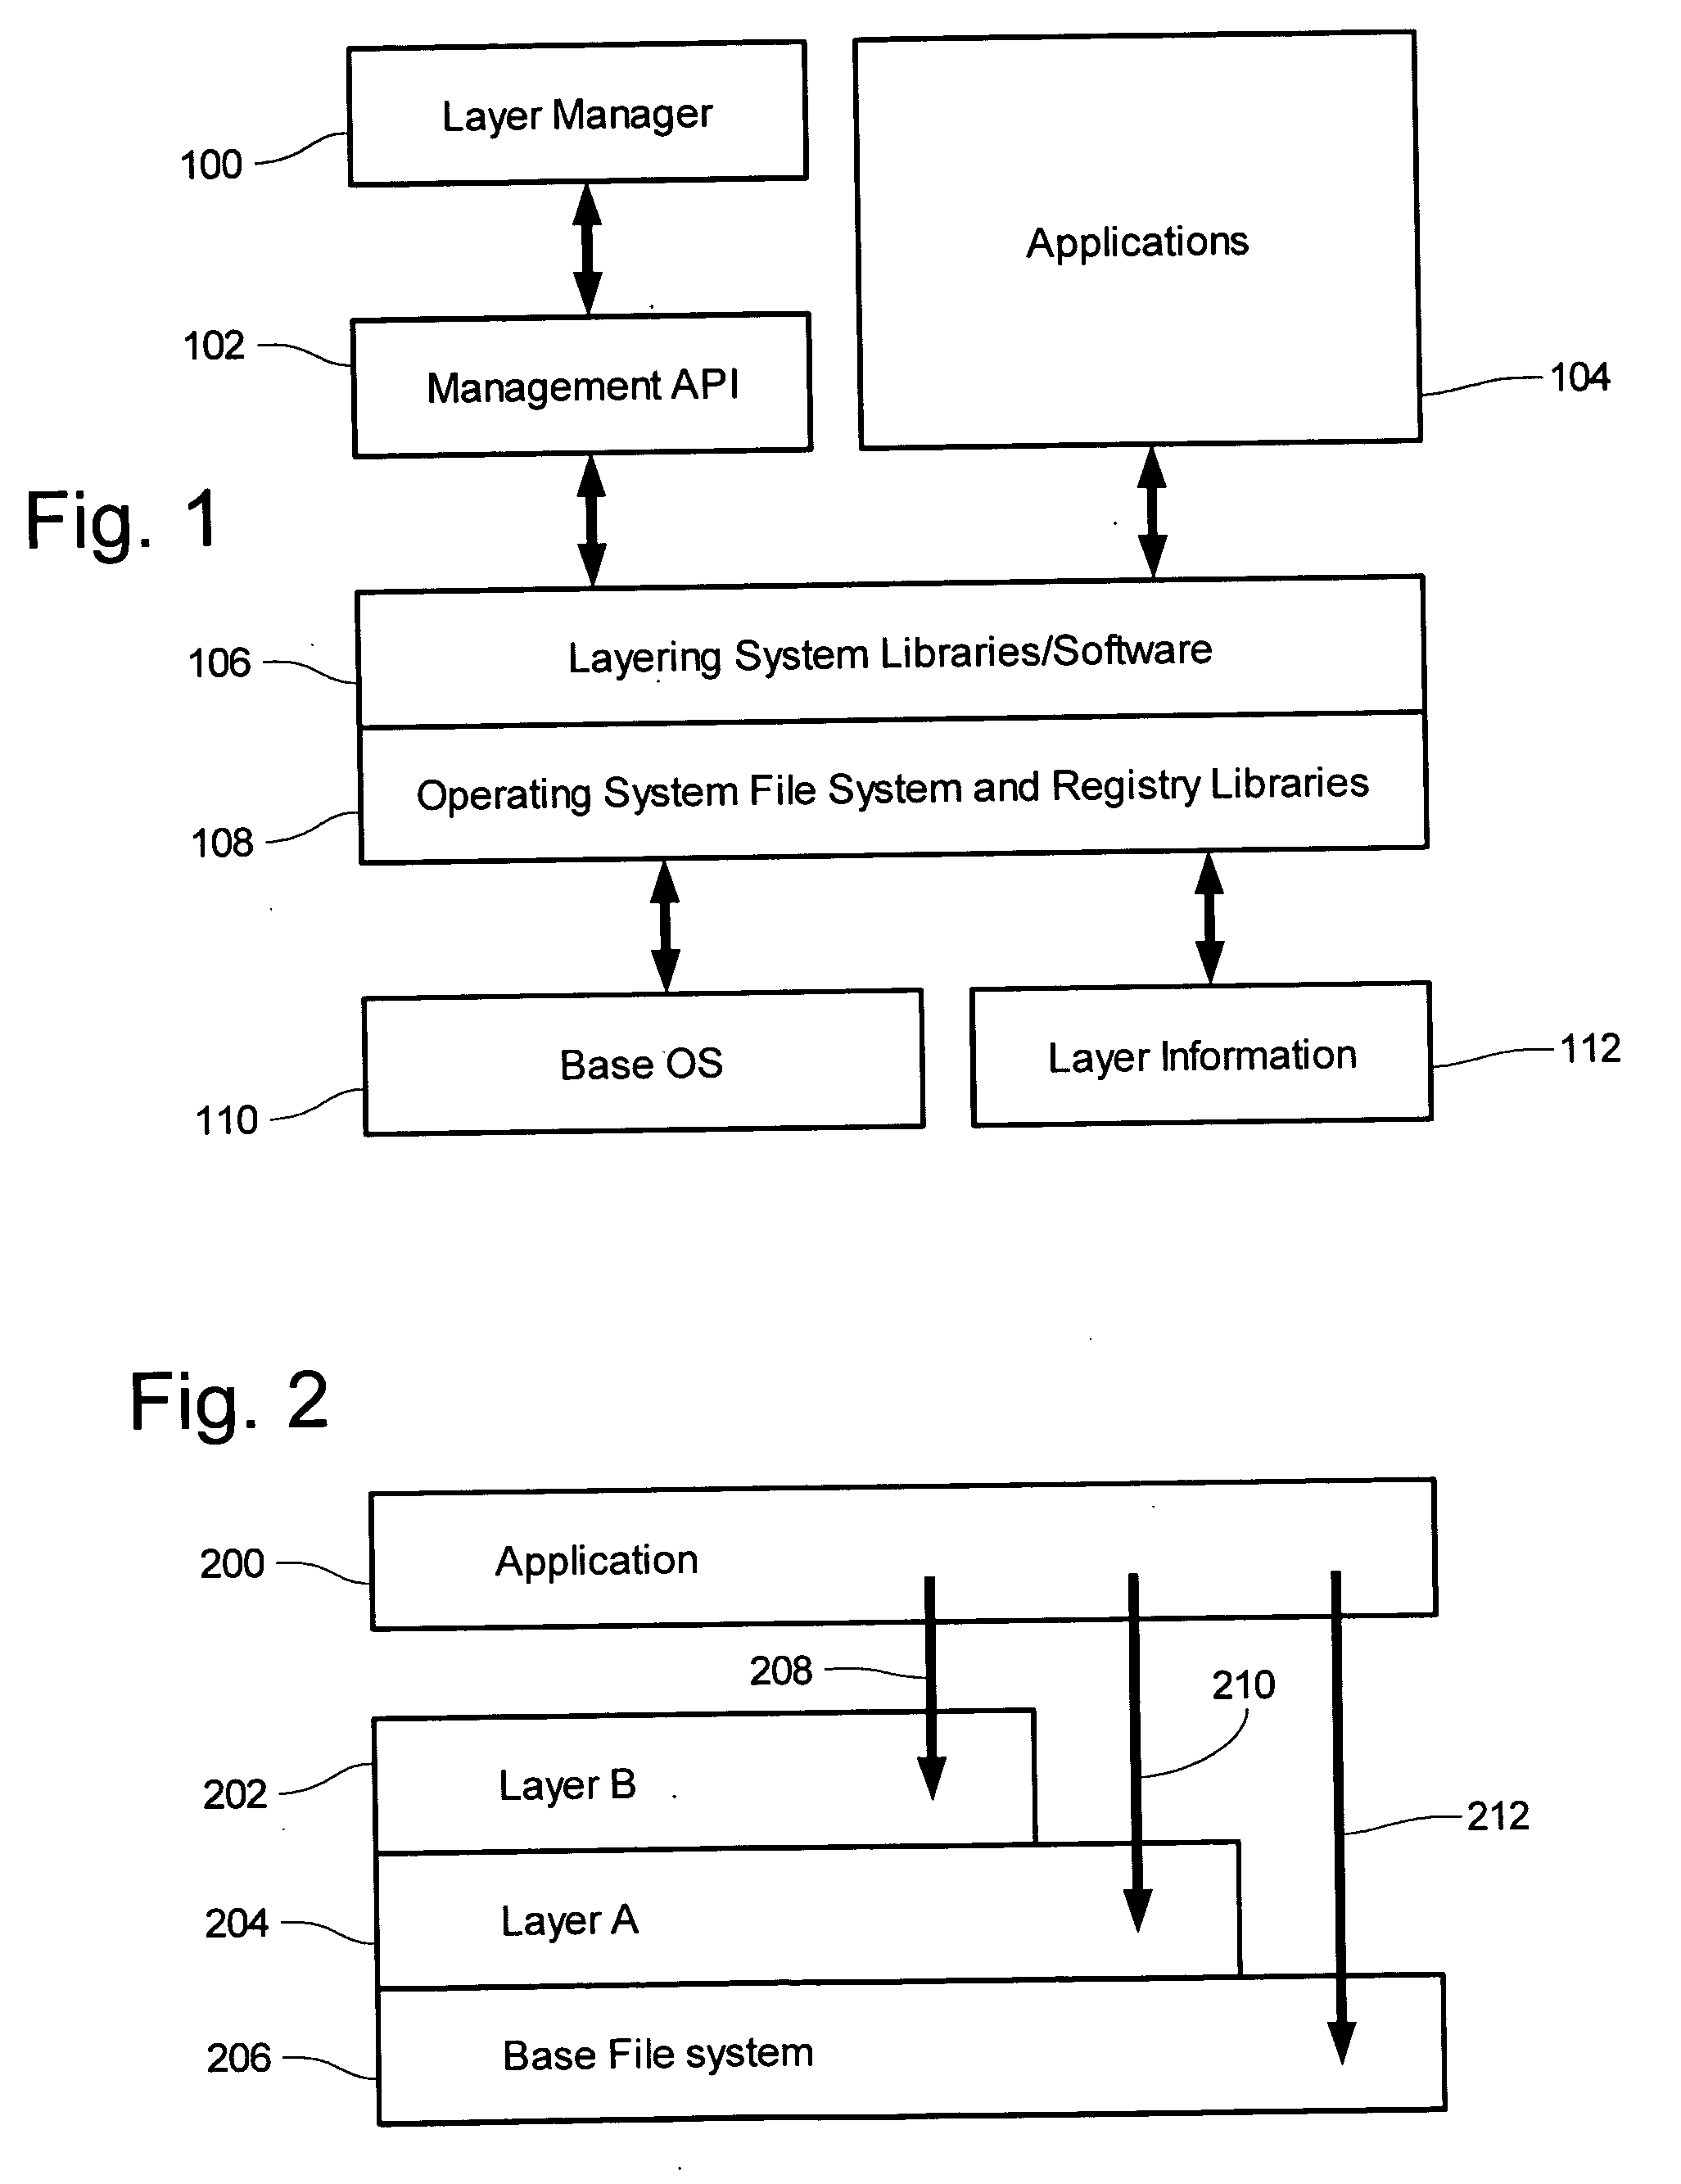 Intrusion protection system utilizing layers and triggers